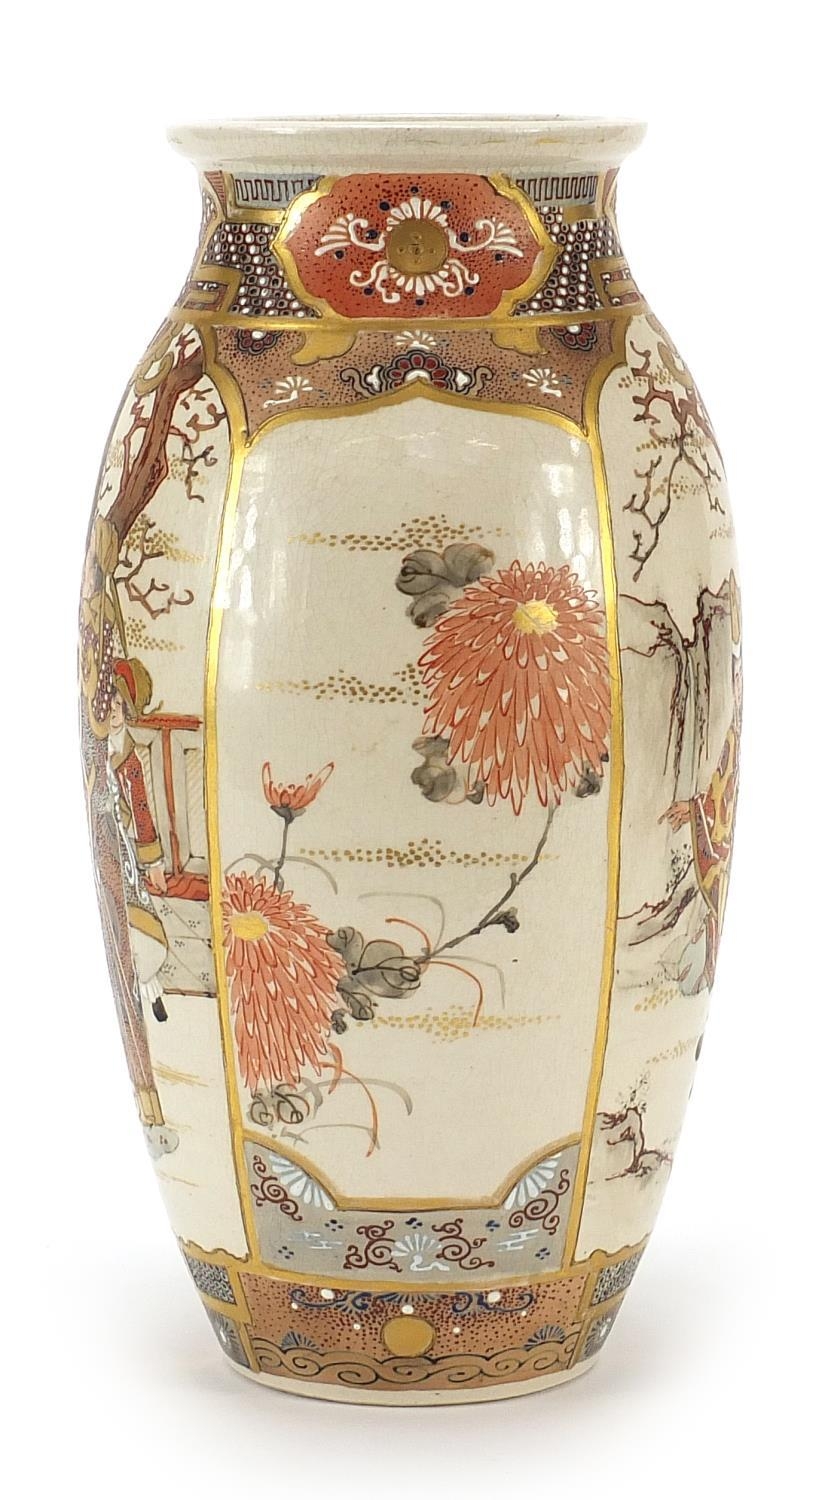 Japanese Satsuma pottery vase hand painted with figures and flowers, 29.5cm high - Image 3 of 9